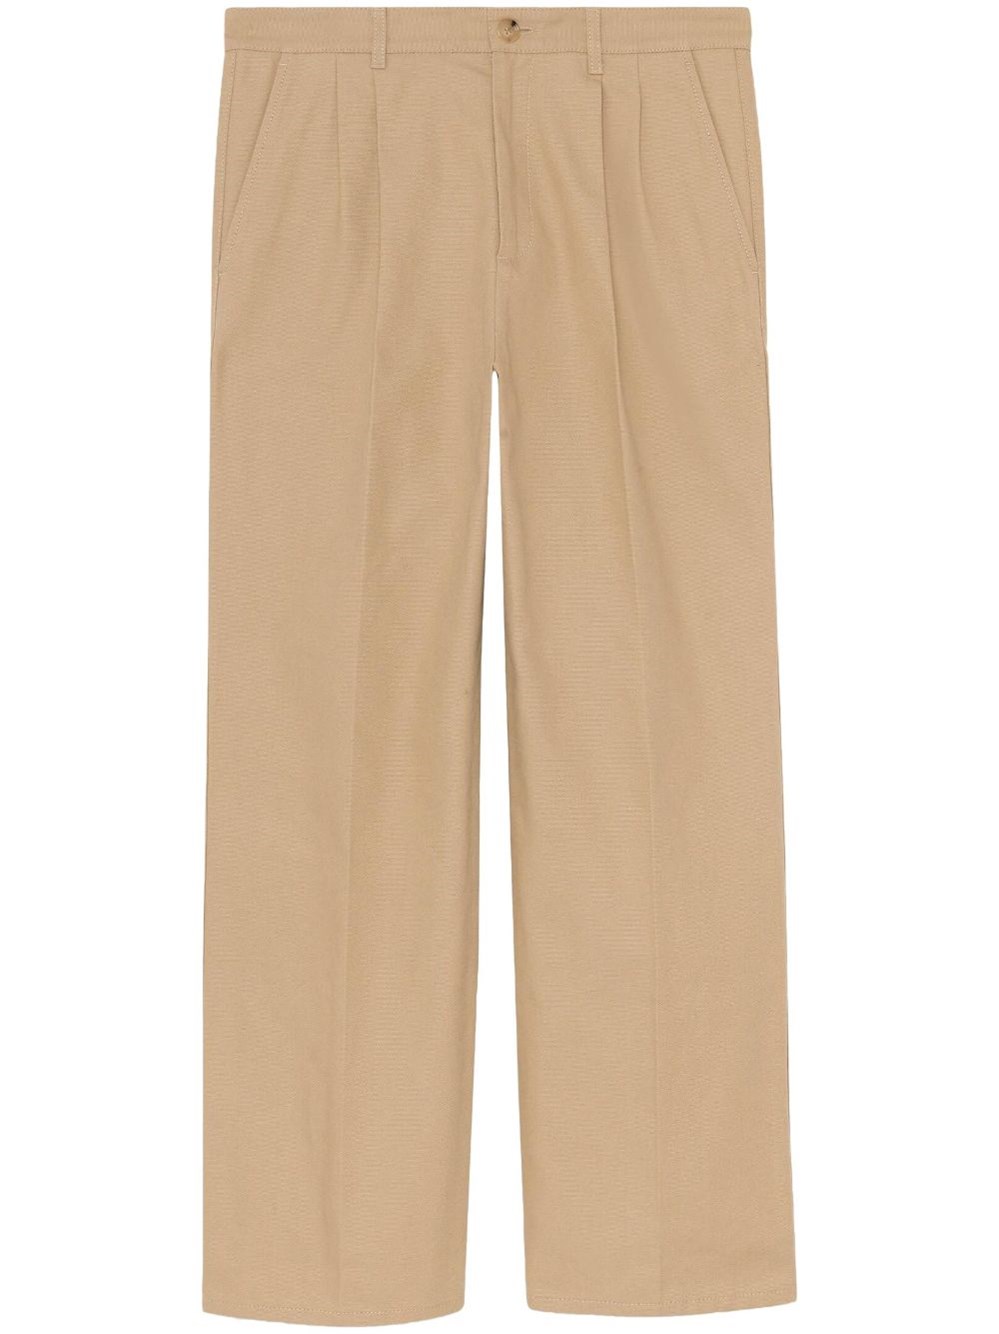 Gucci Dyed Cotton Pants With Patch In Beige